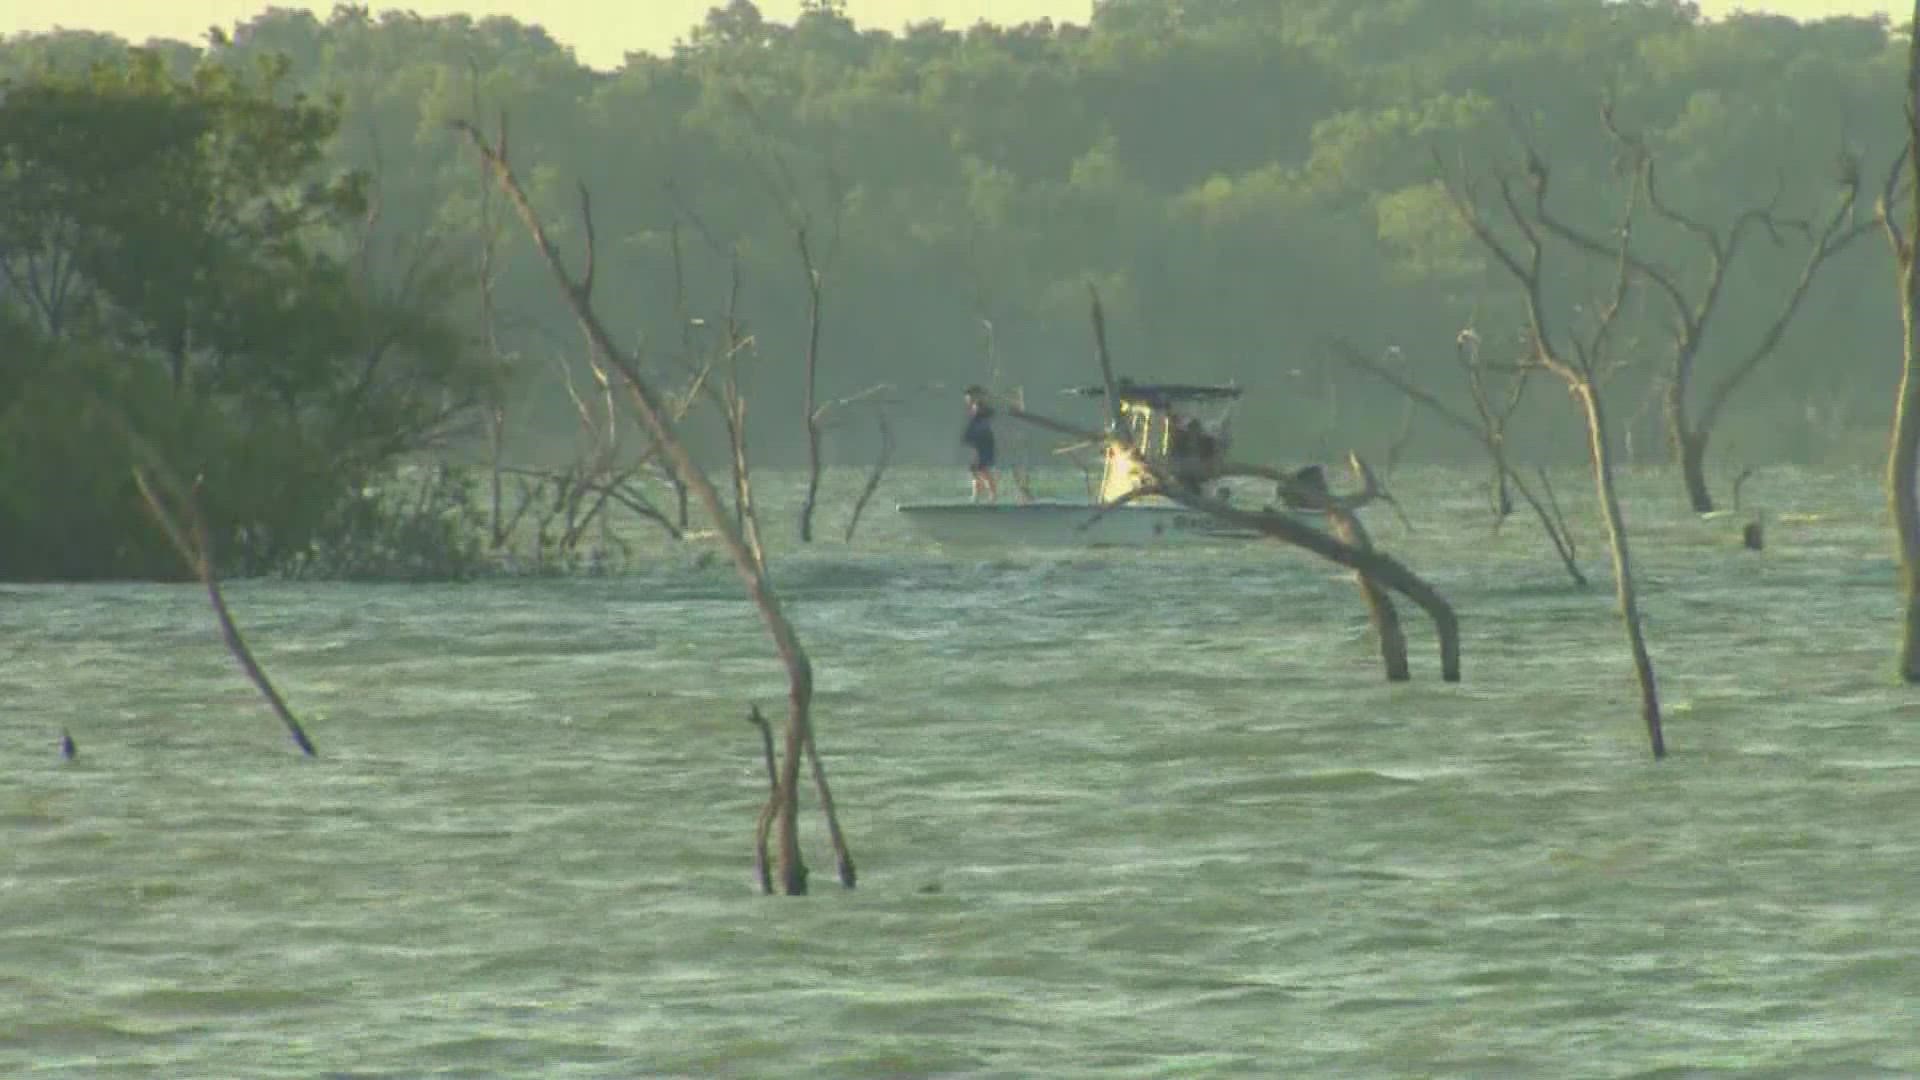 A storm crossed over Lake Lavon on Saturday night and caused a boat with four people onboard to overturn, according to the Collin County Sheriff's Office.